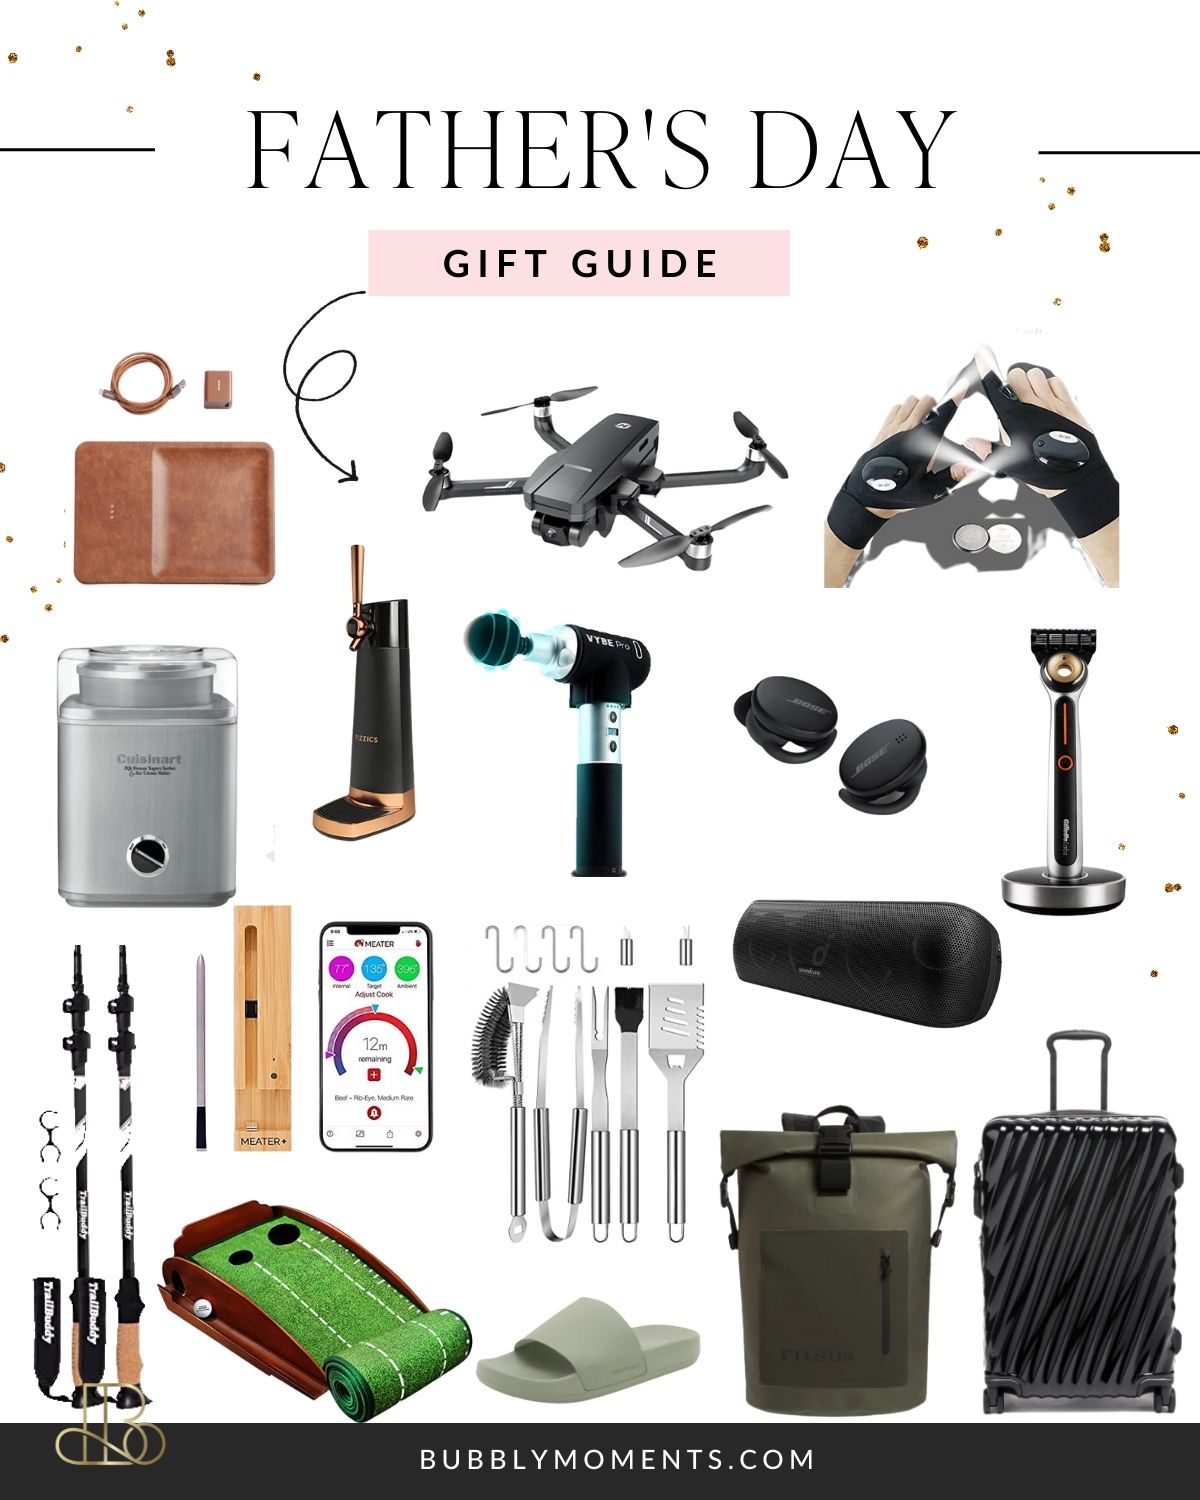 gadgets for camping